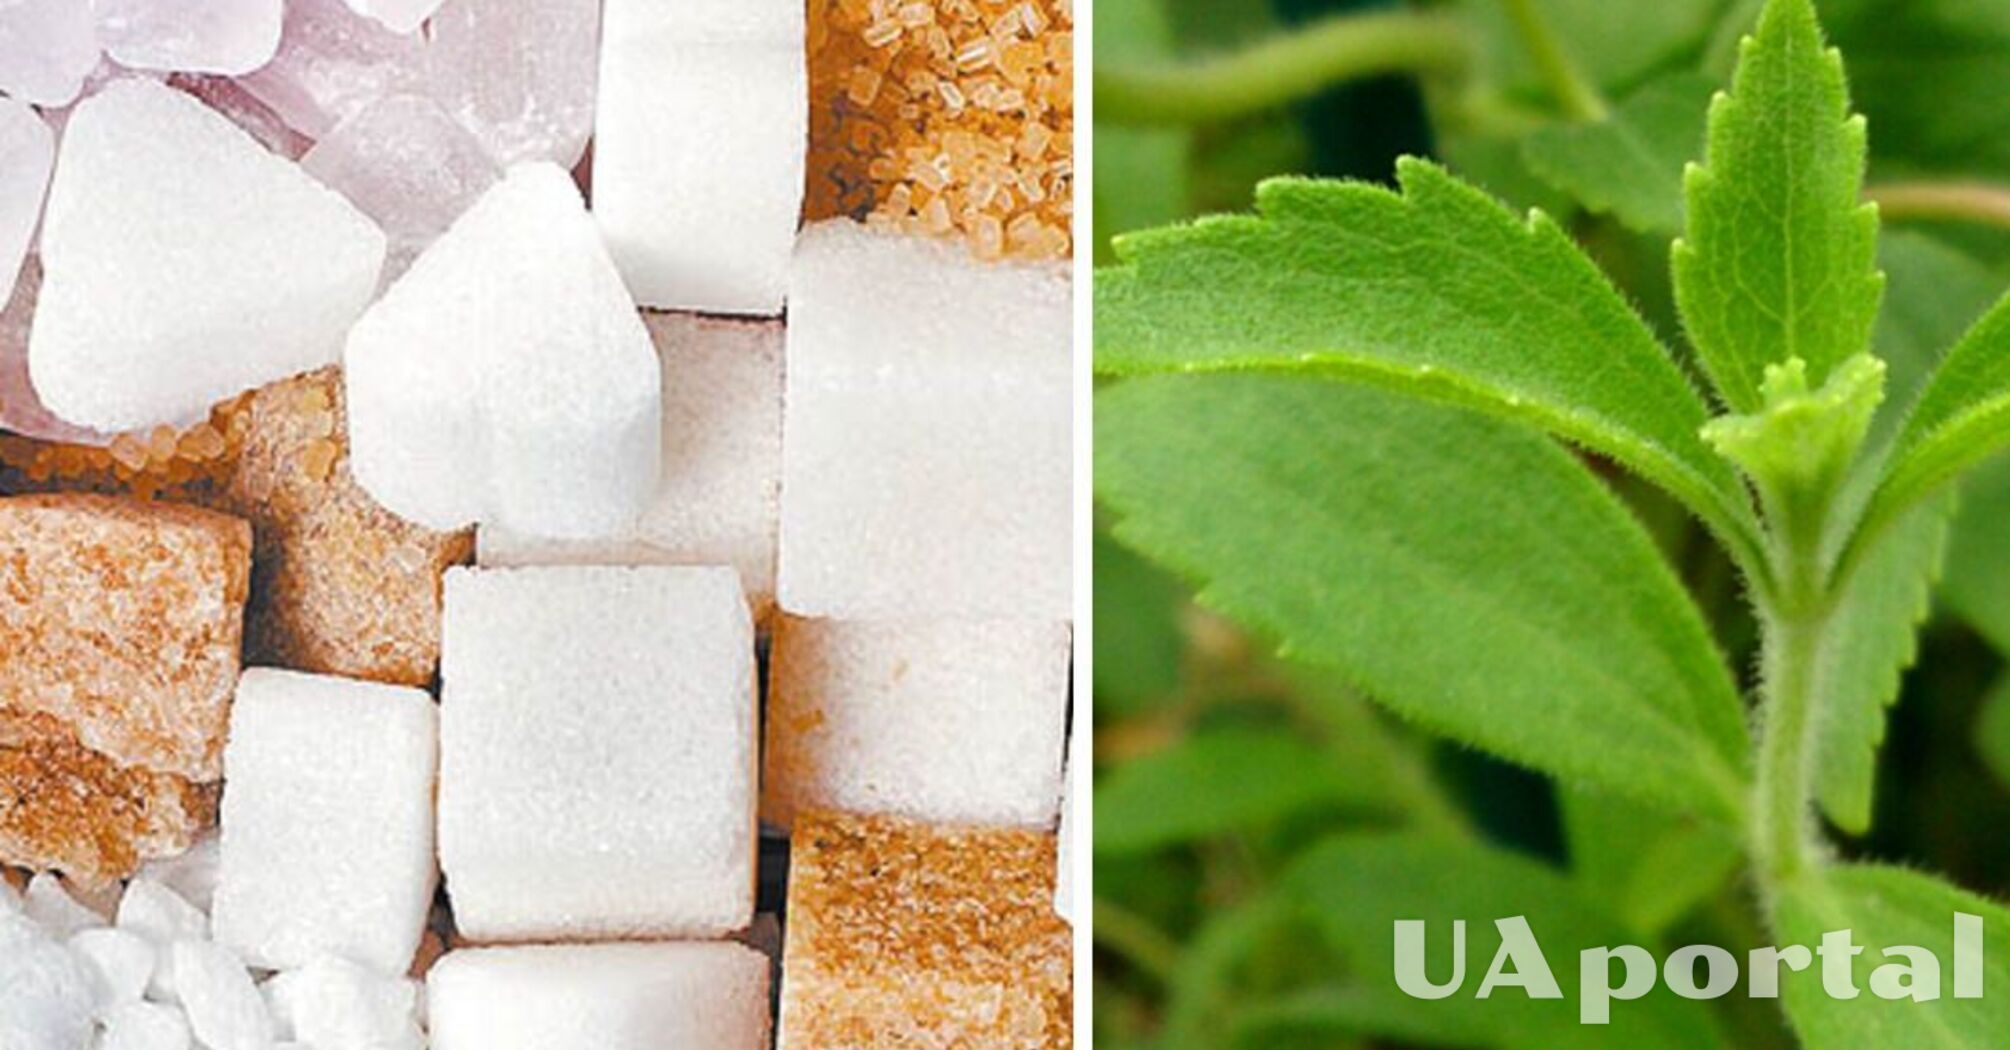 The truth about sweeteners: are they healthy or harmful?